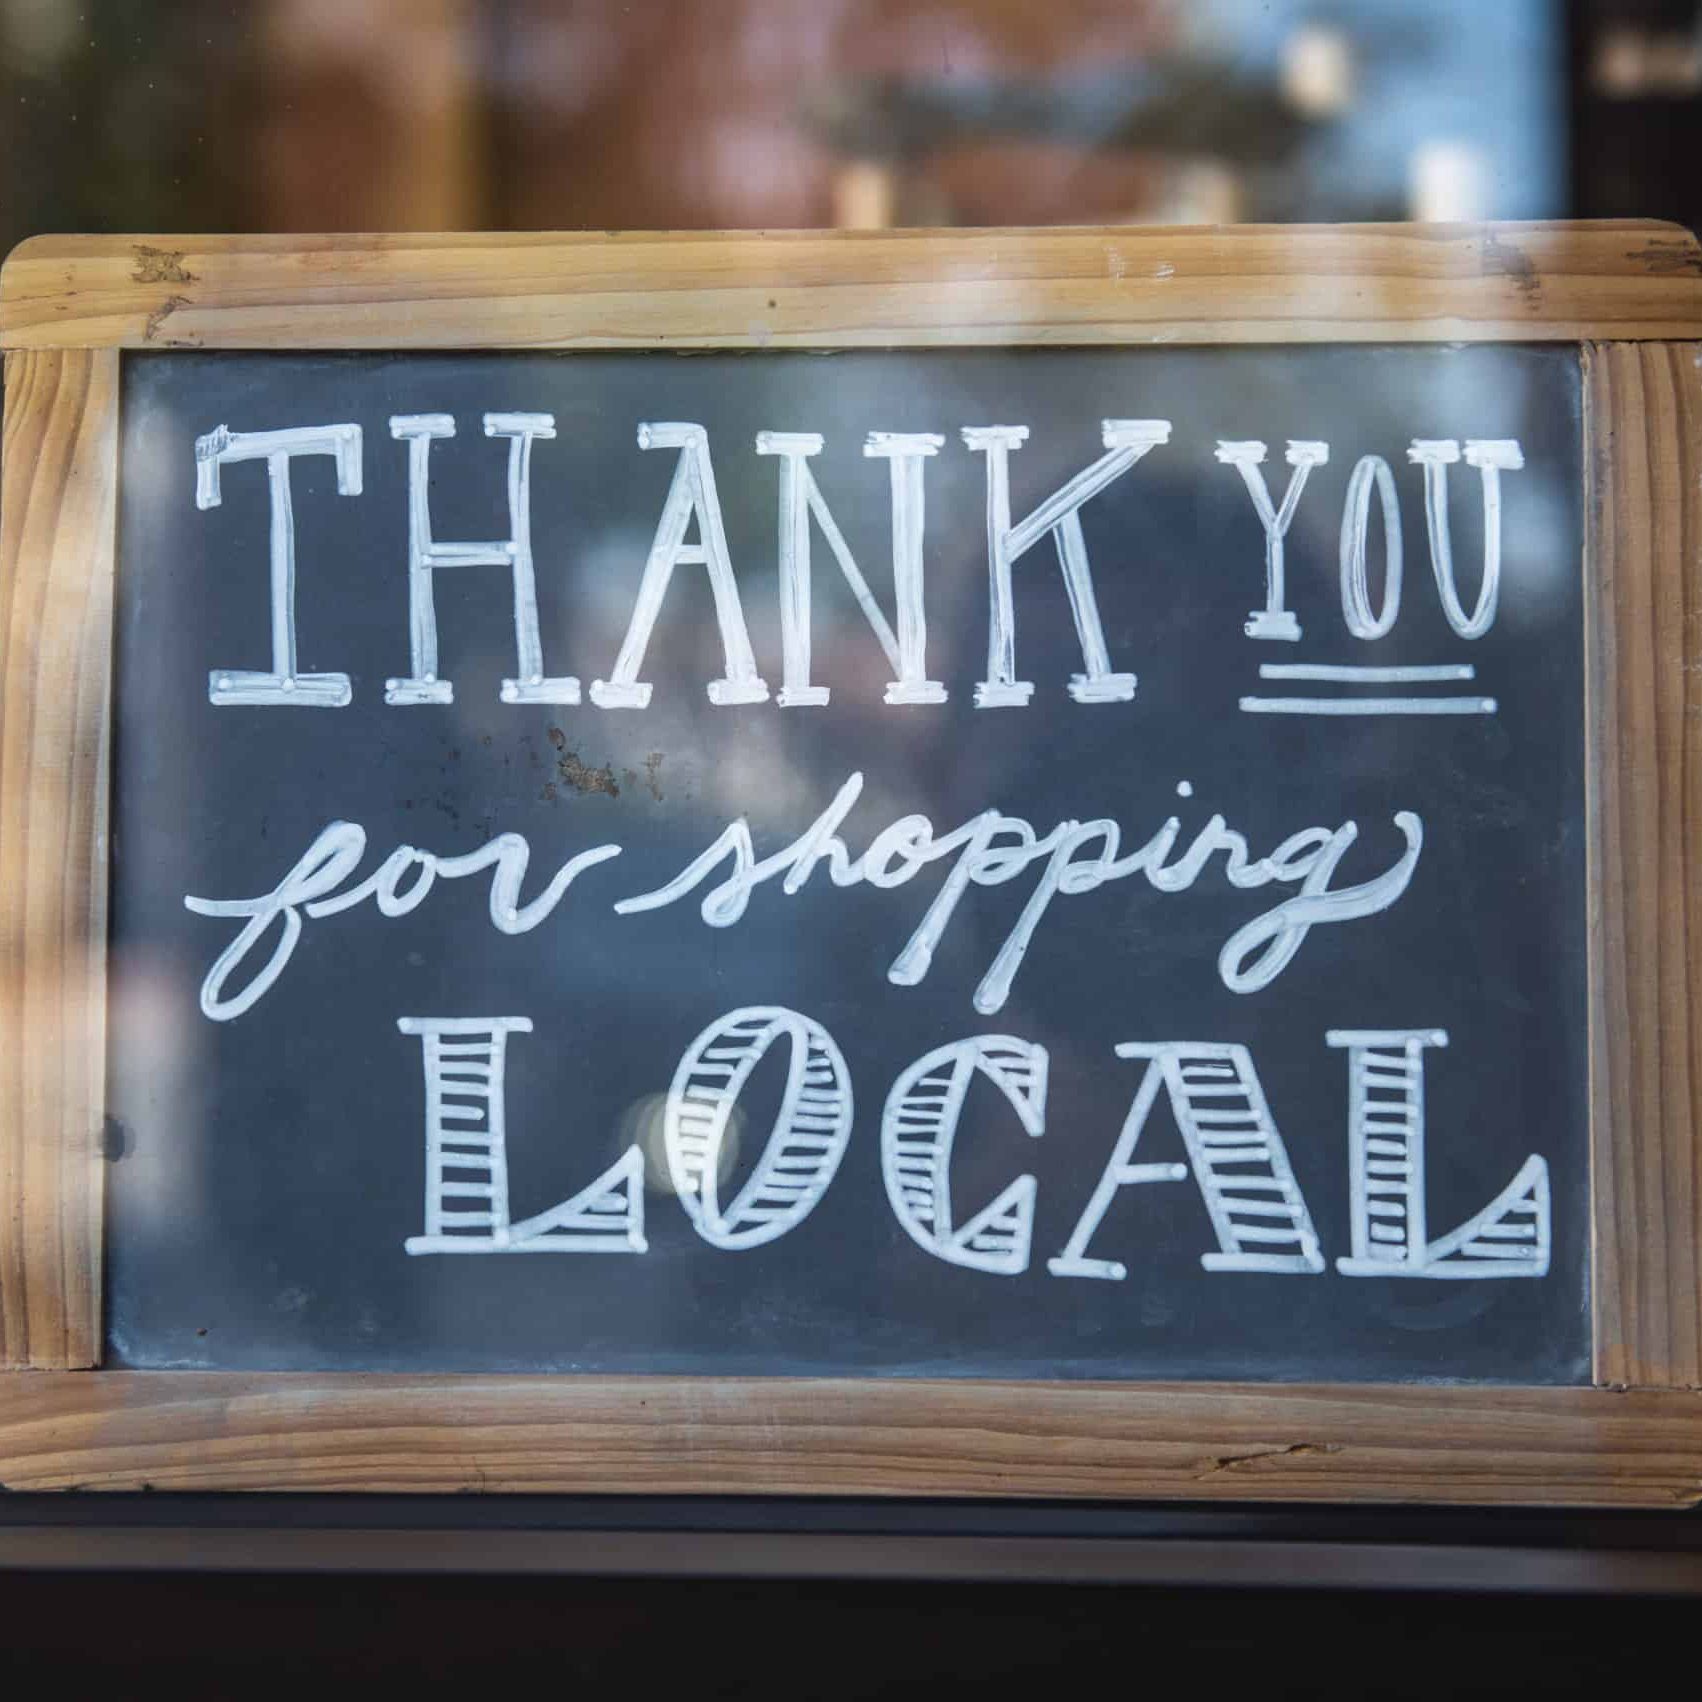 The message on a chalkboard thanks customers for shopping local